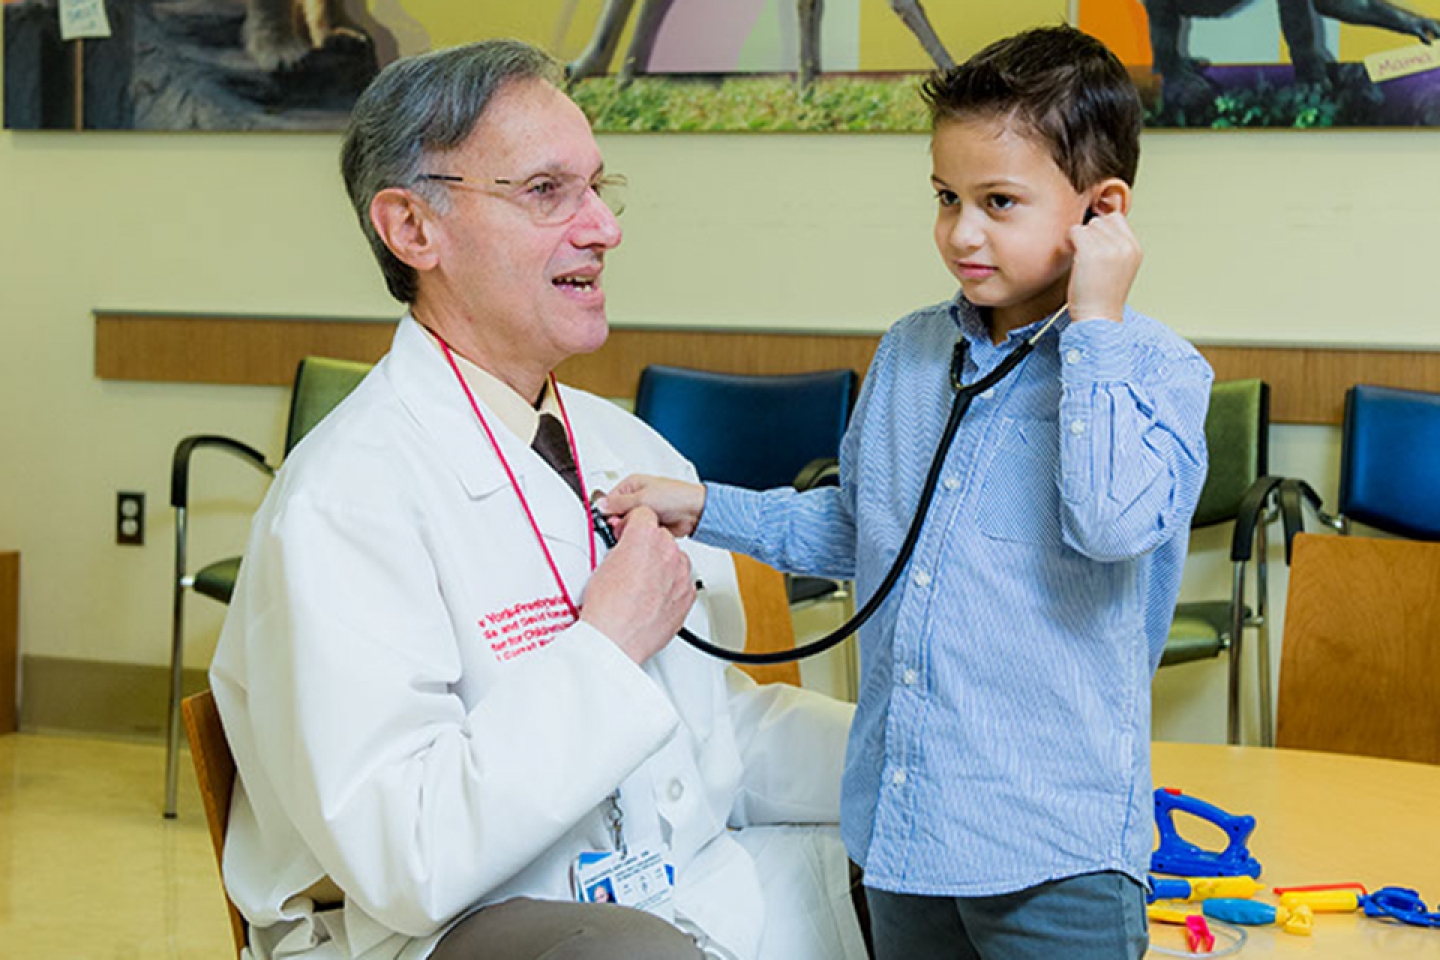 A child plays with a doctor's stethoscope 